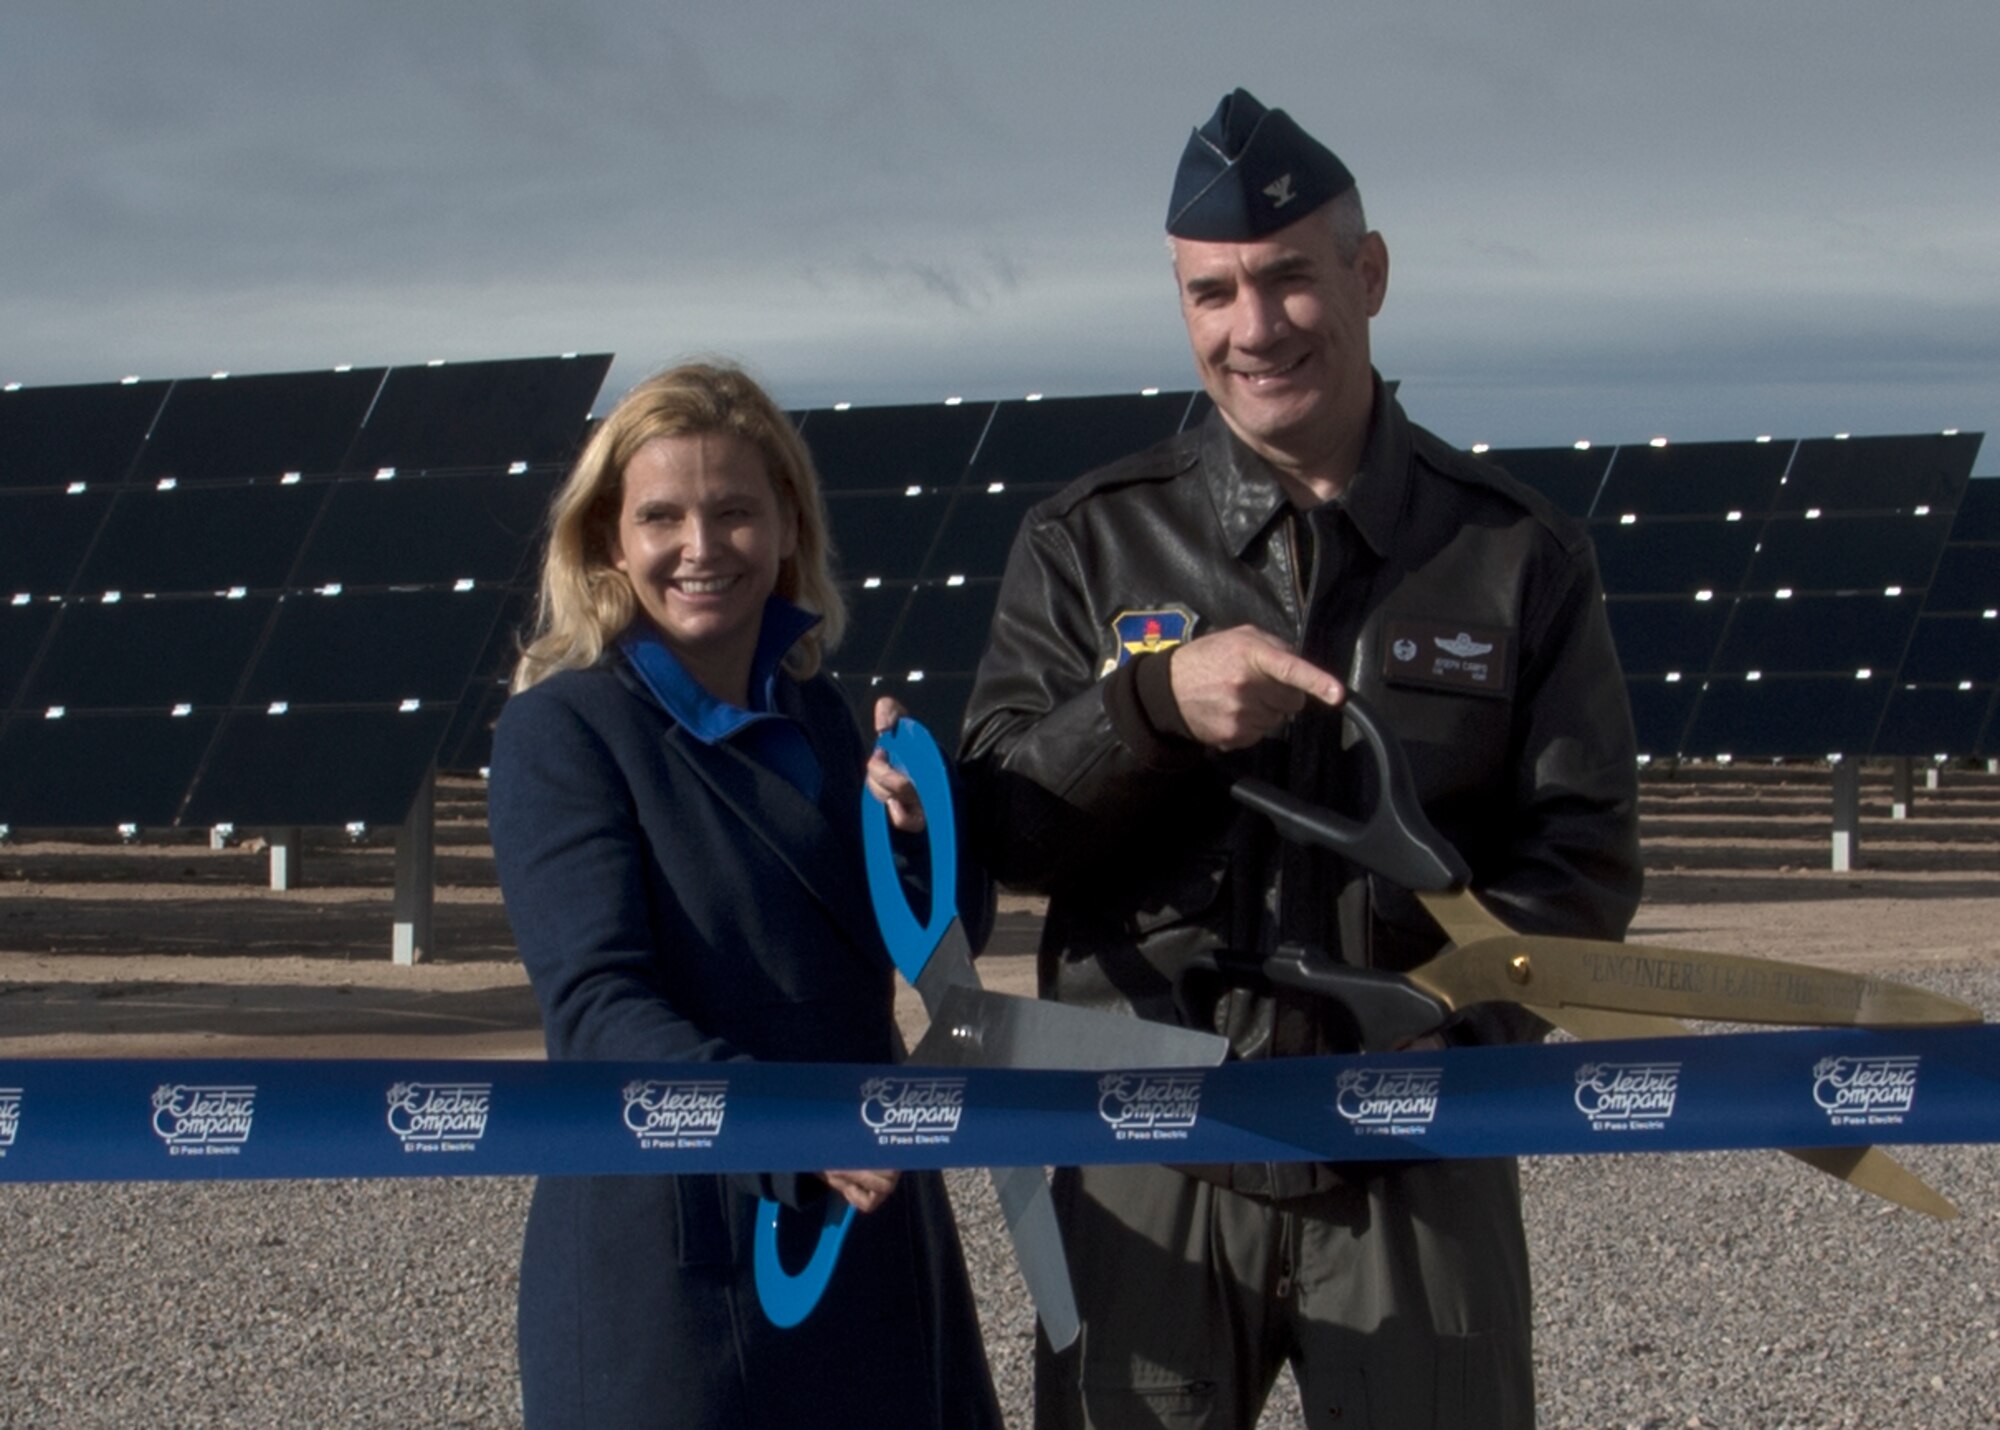 Col. Joseph L. Campo (right), 49th Wing commander, and Mary Kipp (left), El Paso Electric CEO, cut a ribbon at the solar array opening ceremony Oct. 19 on Holloman Air Force Base, N.M. The solar array is made up of almost 56,000 thin-film modules that will generate enough electricity to power more than 1,700 homes annually, prevent emissions by over 9,000 metric tons and save approximately nine million gallons of water. (U.S. Air Force photo by Airman 1st Class Kindra Stewart)